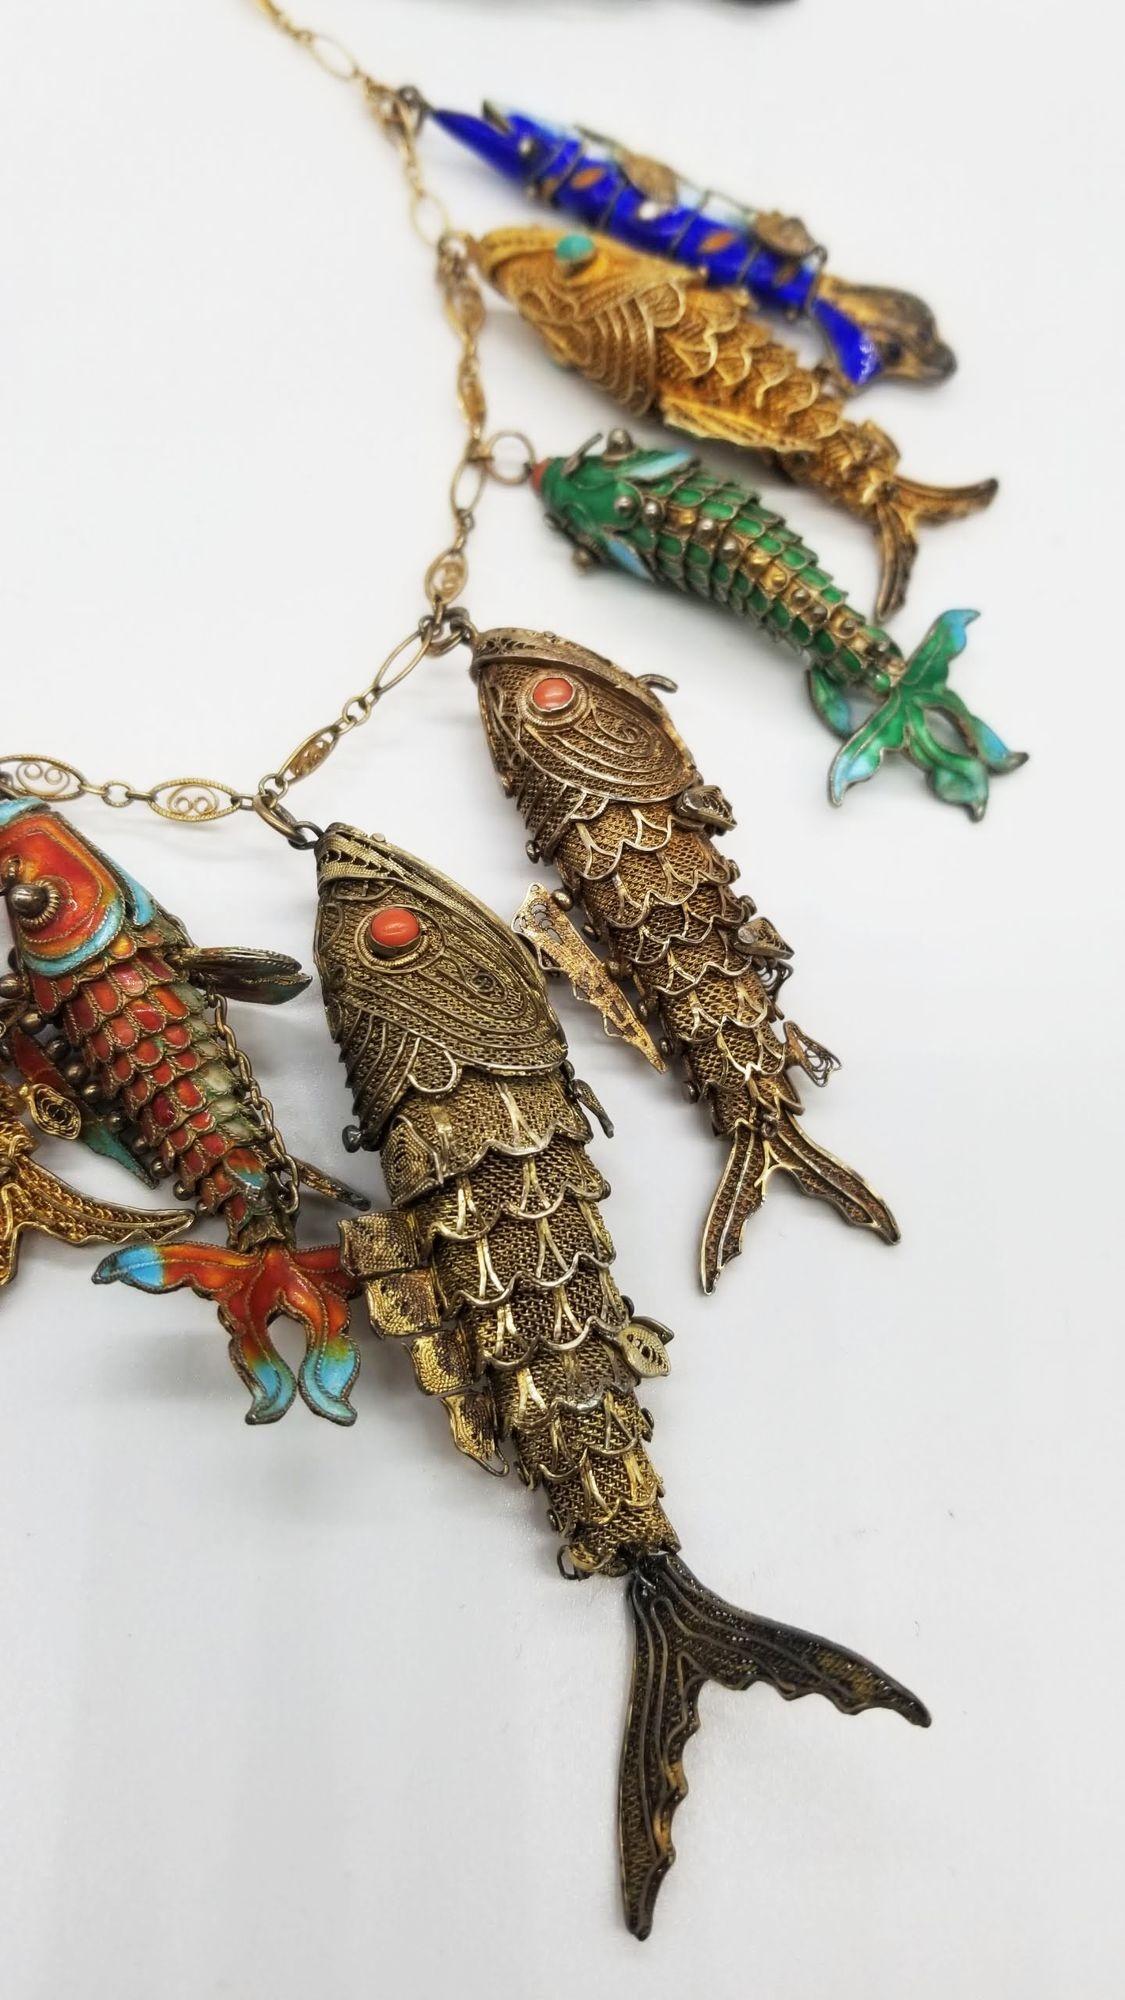 Vintage Chinese Export Koi Fish Necklace from the 1920s-1940 For Sale 2